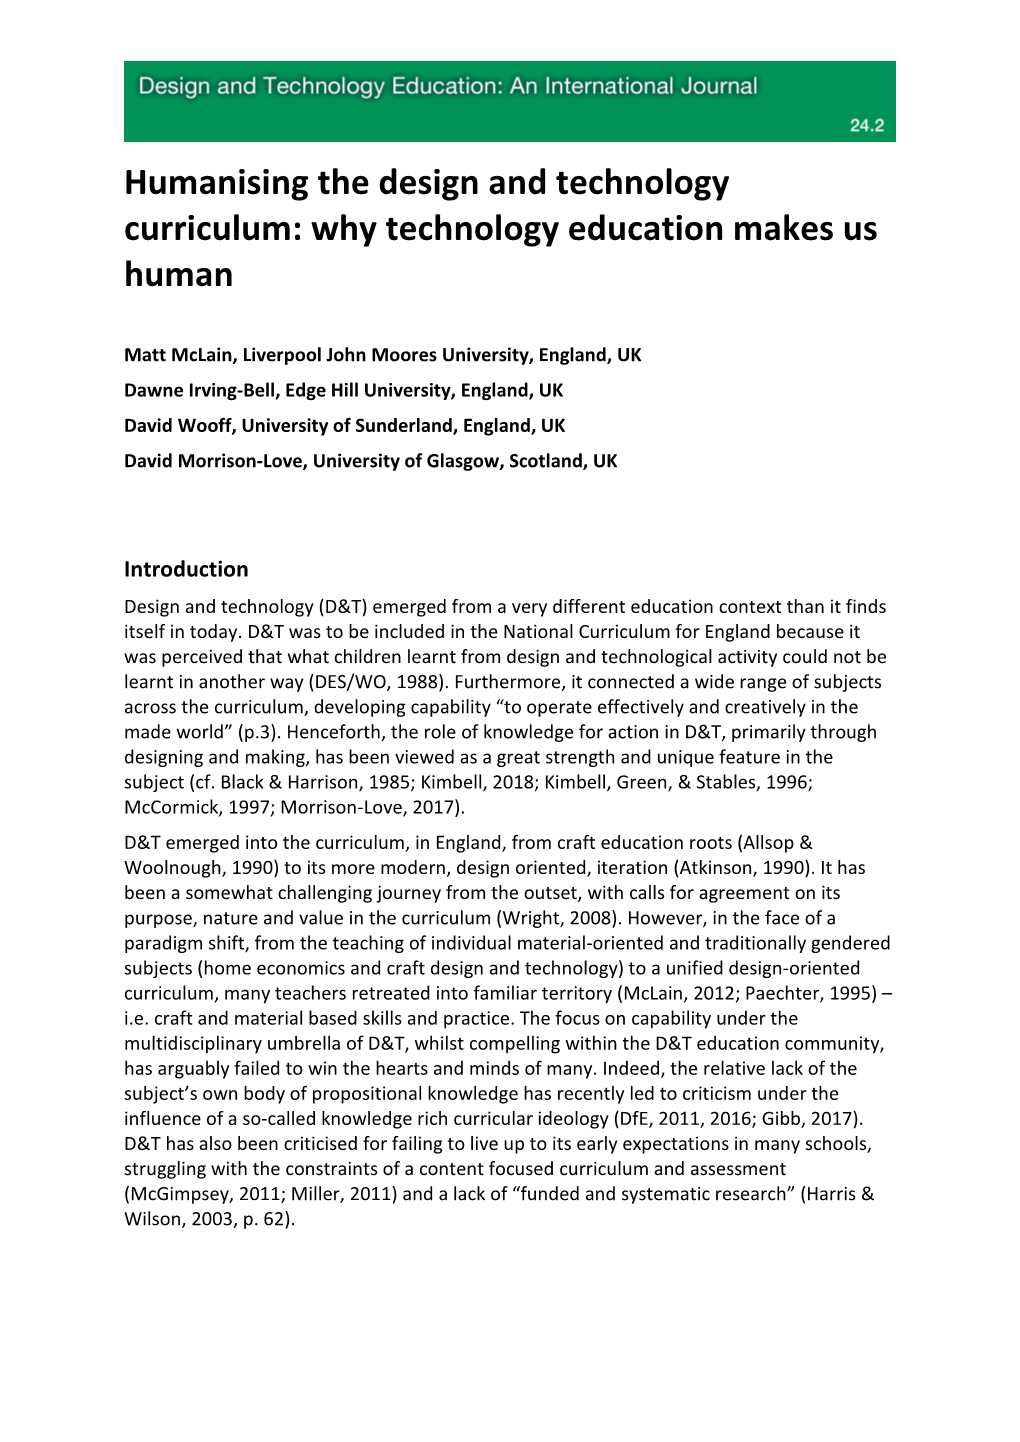 Humanising the Design and Technology Curriculum: Why Technology Education Makes Us Human